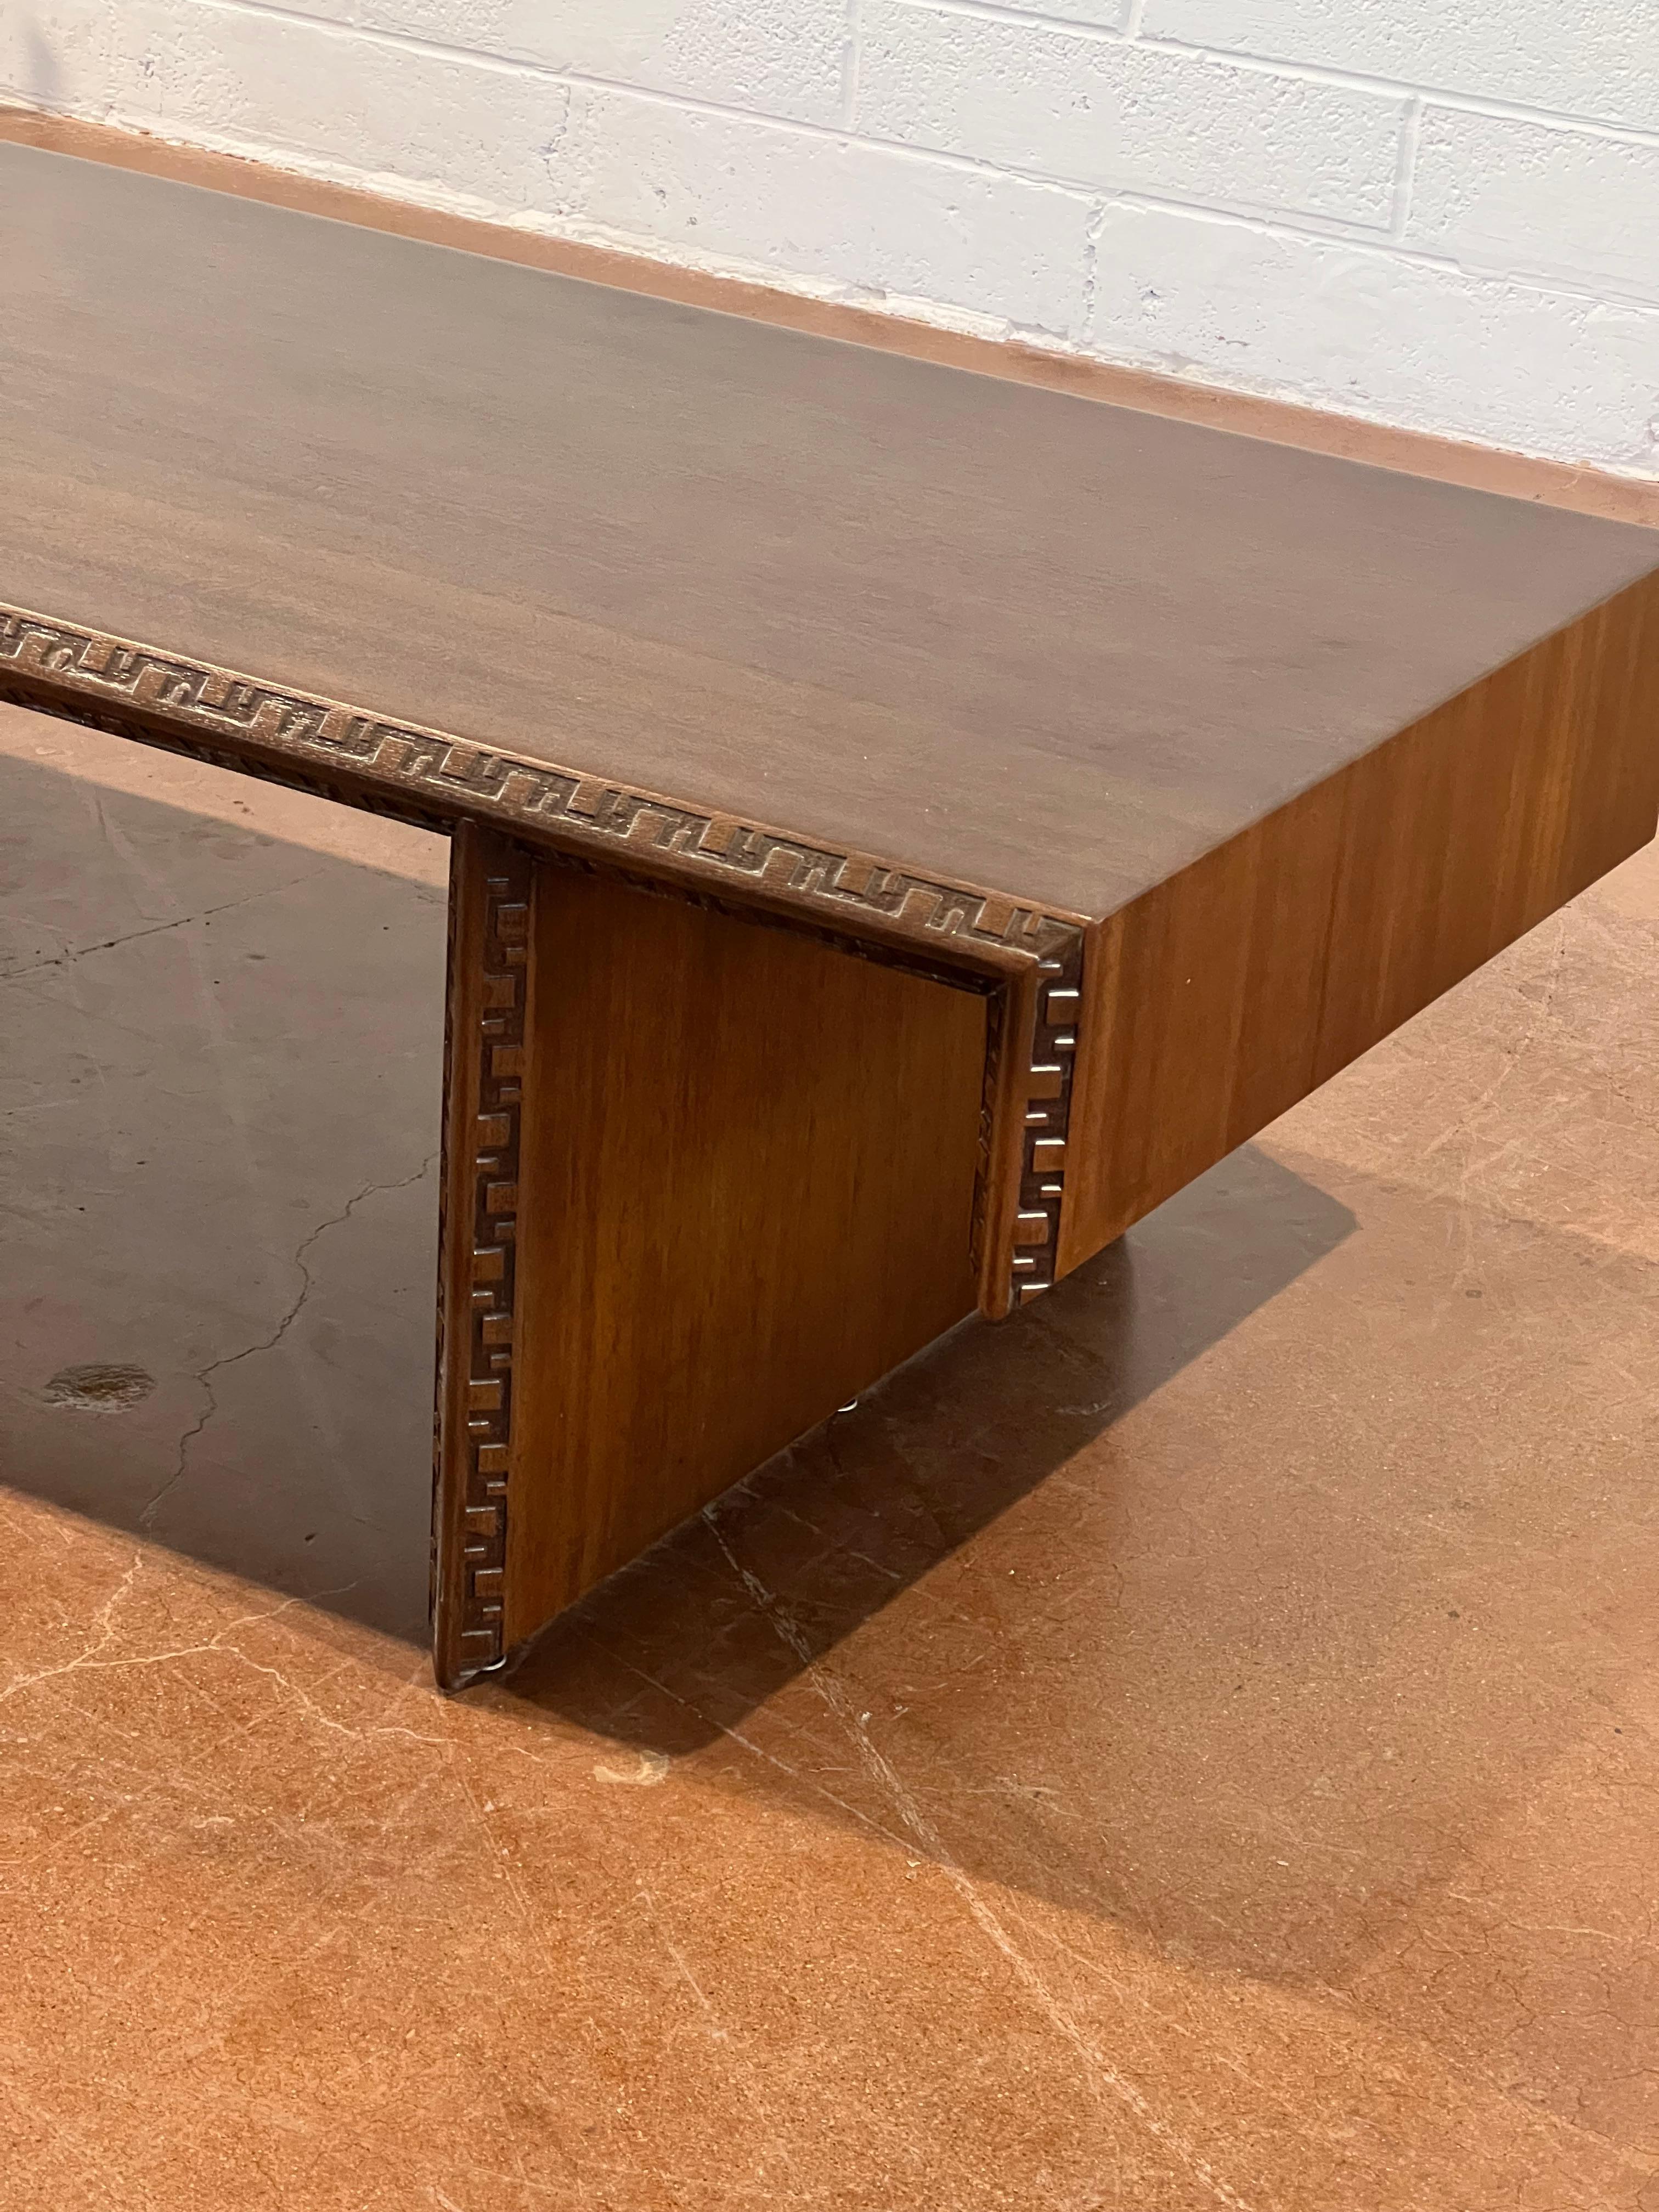 An exquisite mahogany waterfall style coffee table by Frank Lloyd Wright for Henredon. 